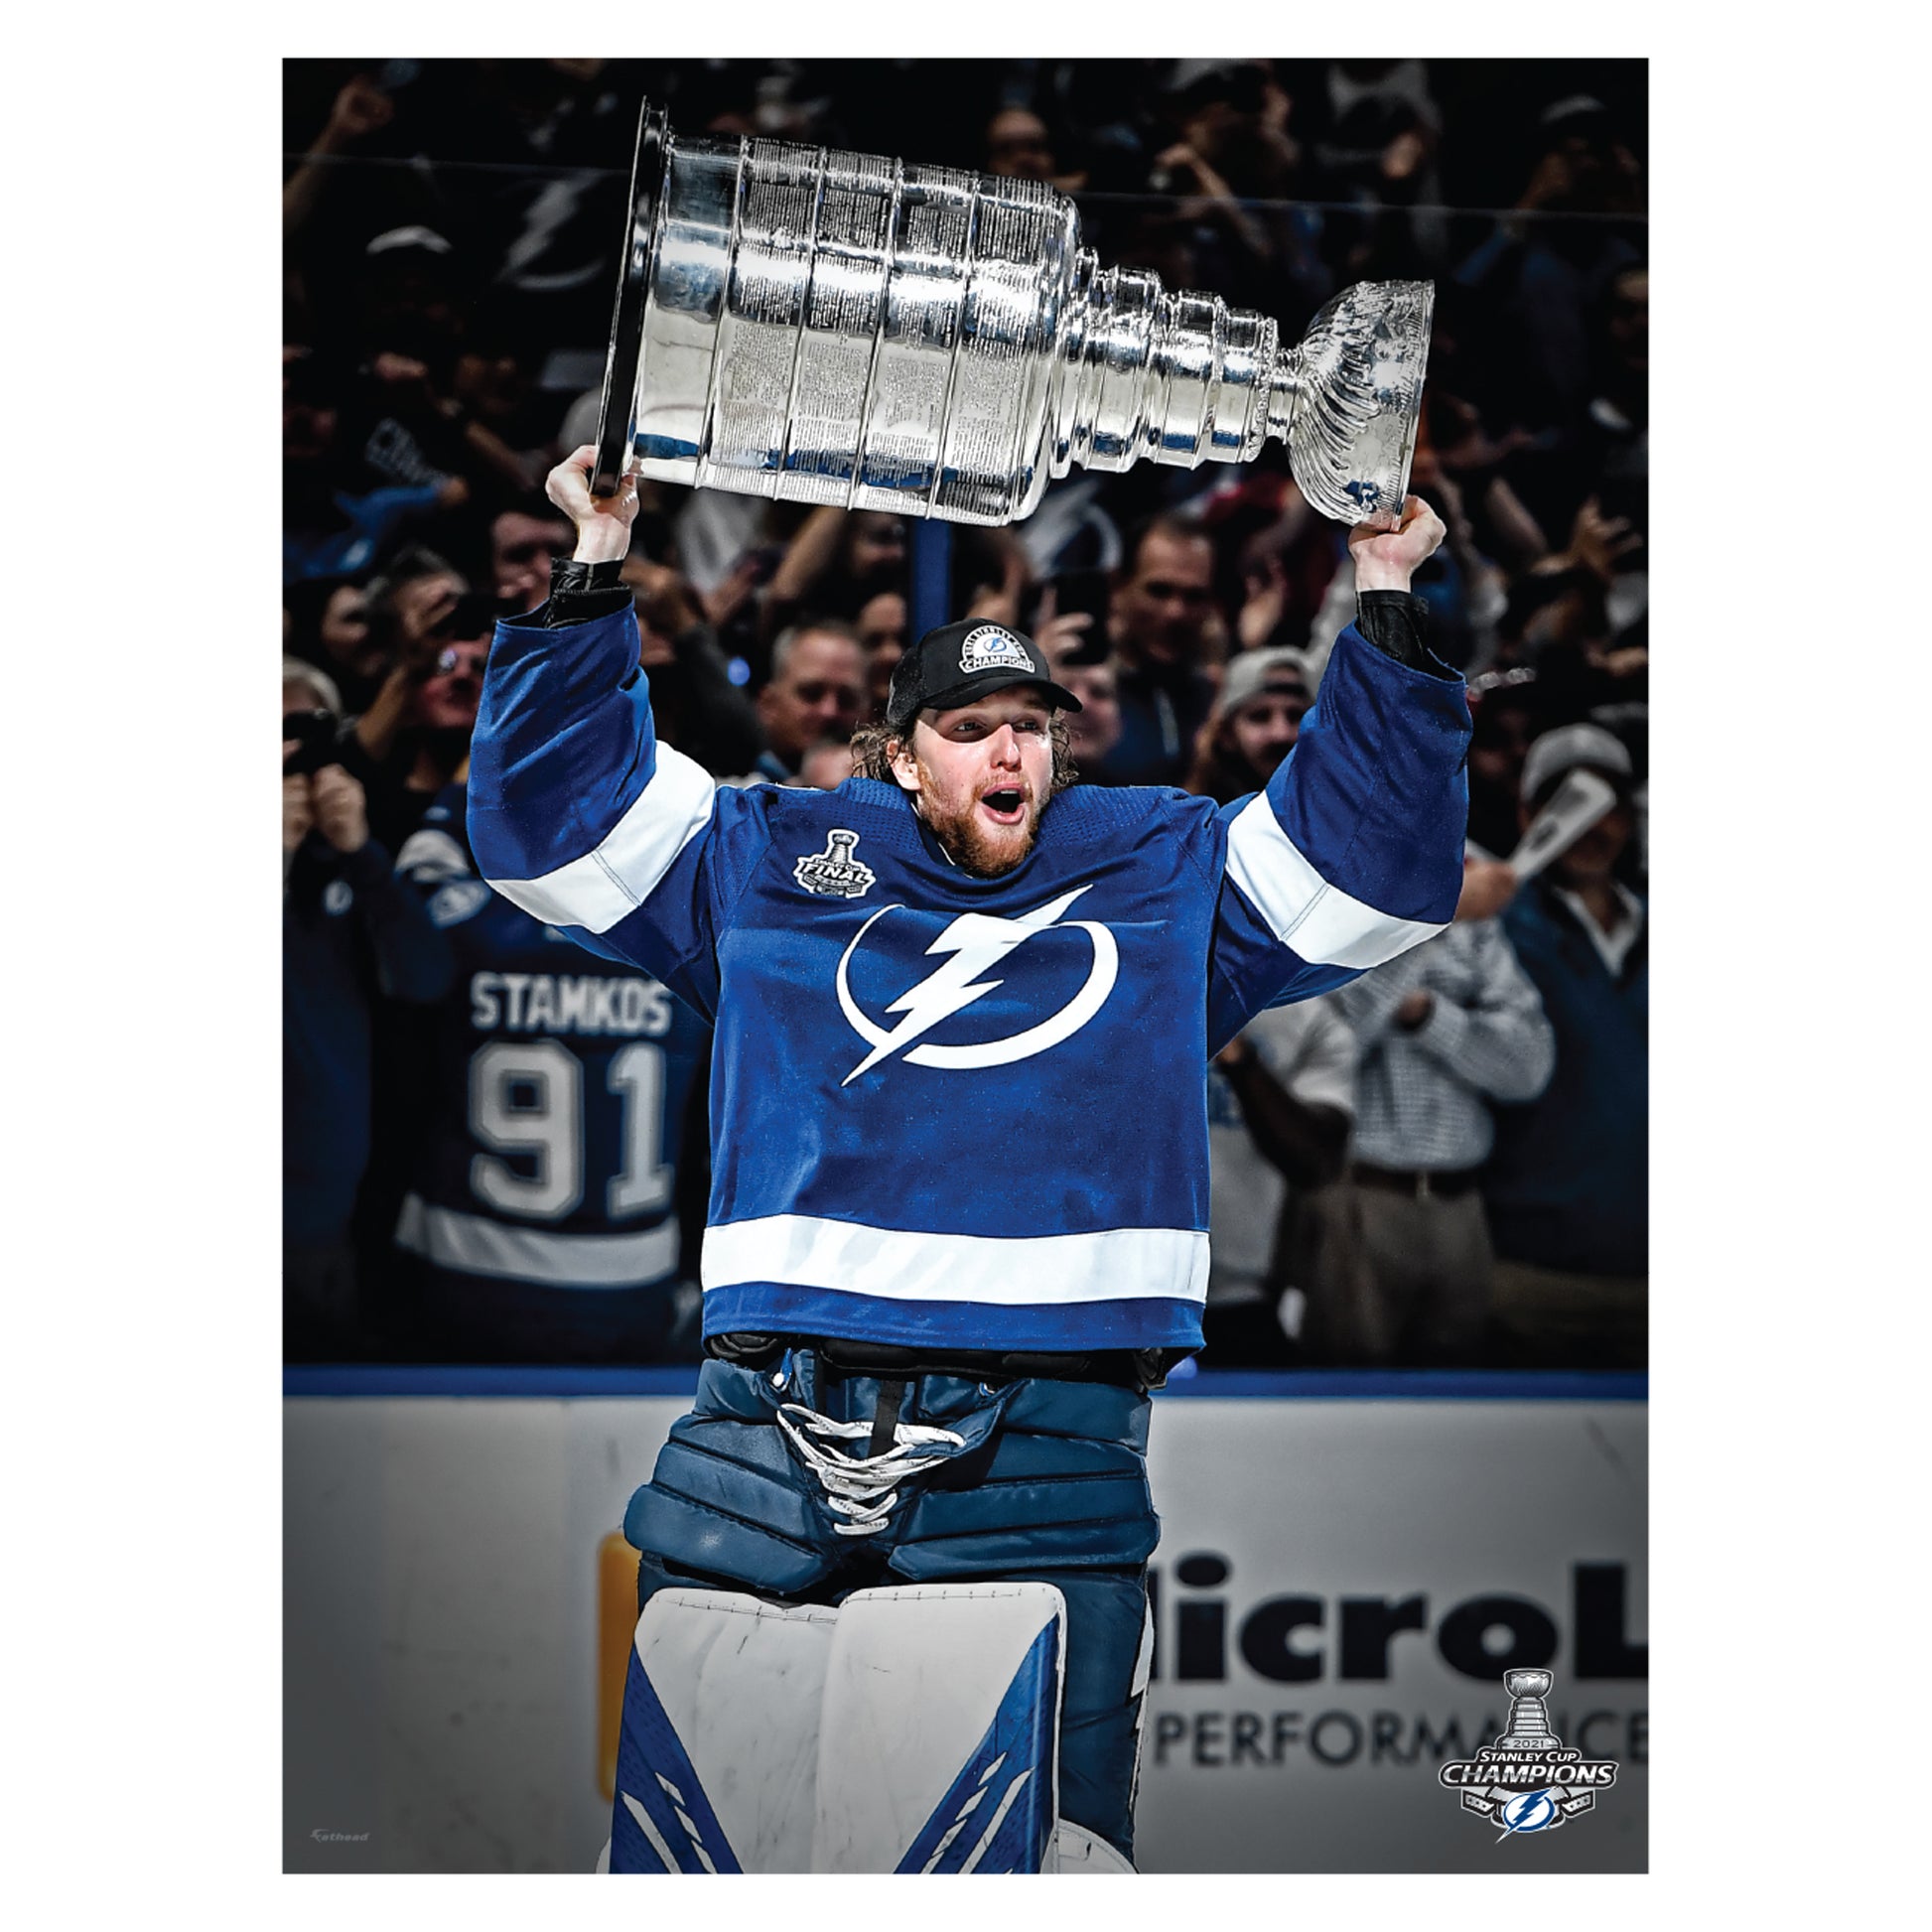 ice hockey - Do Stanley Cup Champions get a replica of the cup? - Sports  Stack Exchange